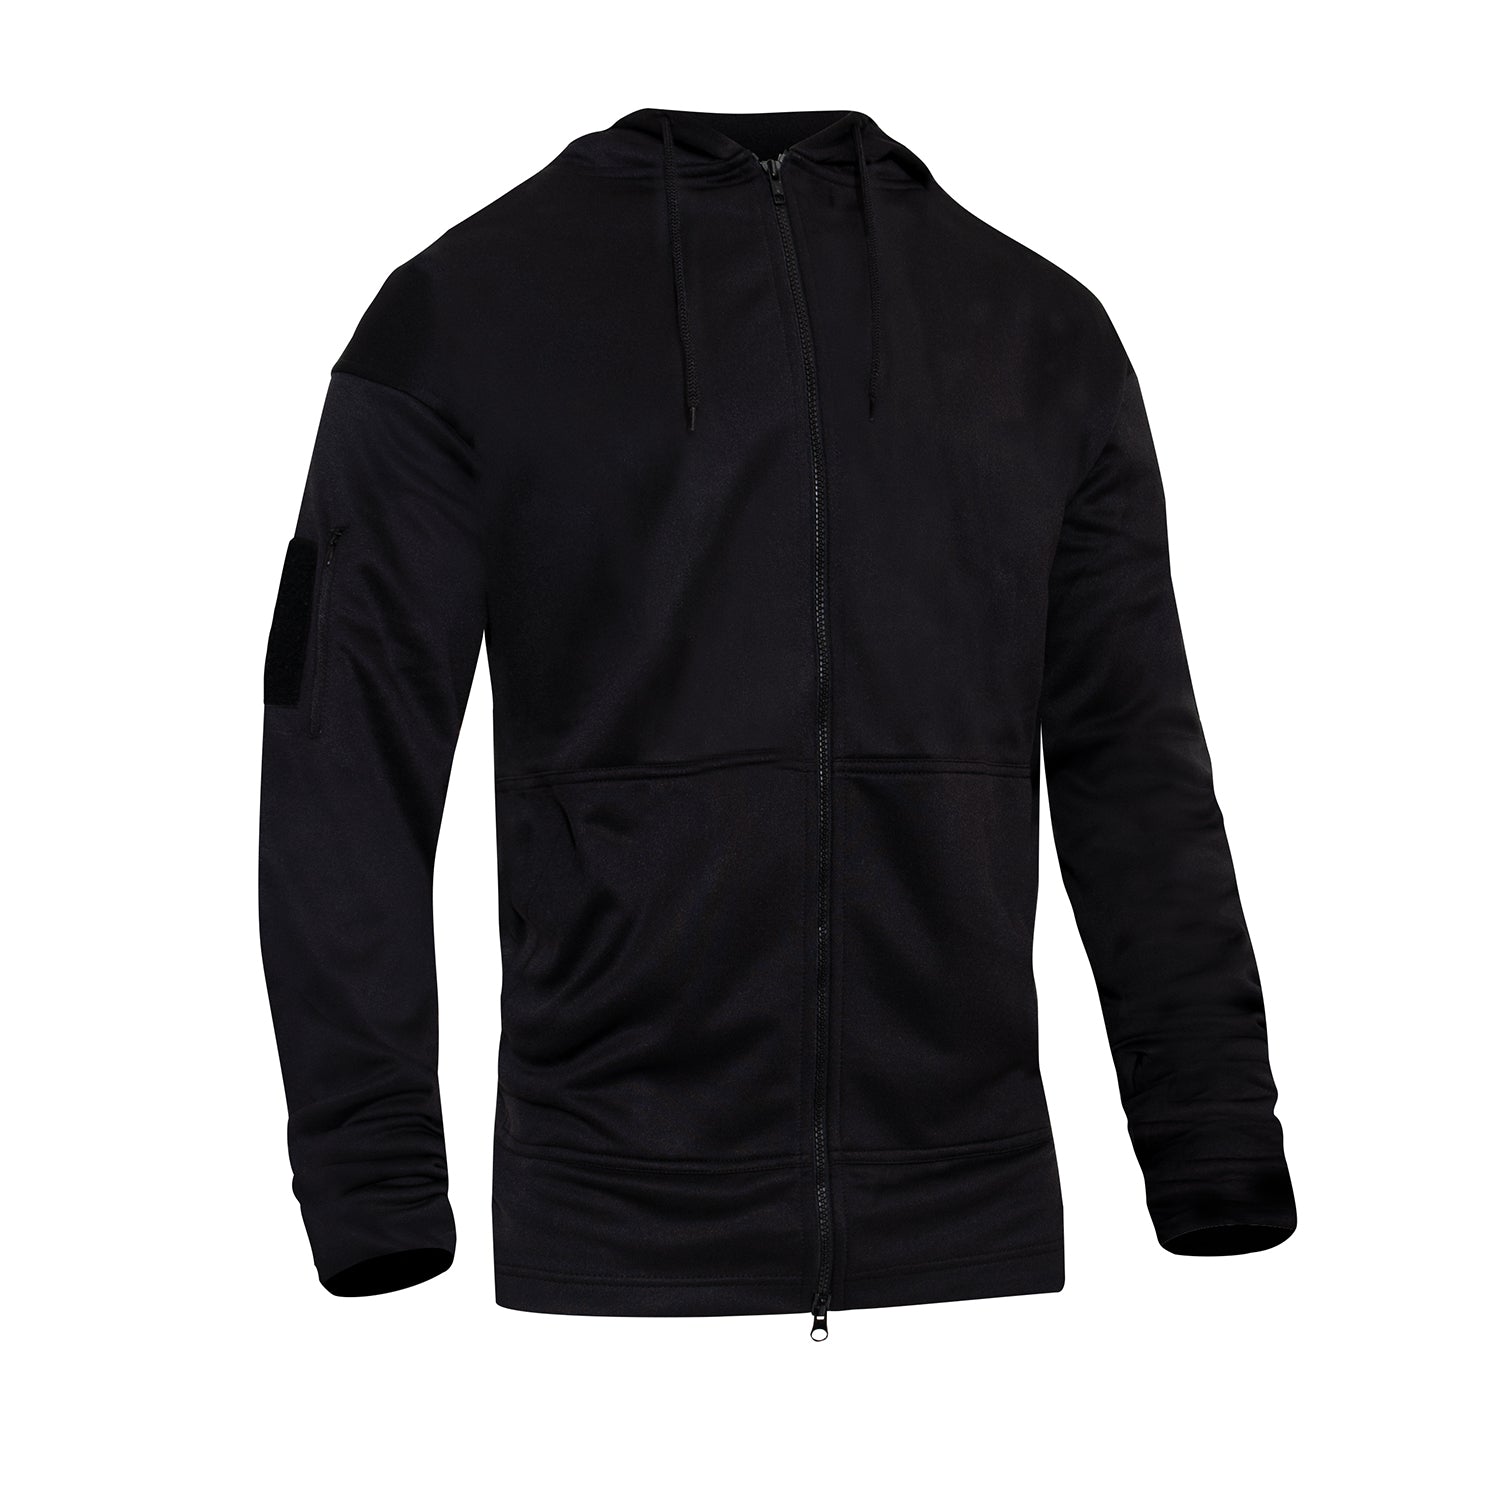 Milspec Concealed Carry Zippered Hoodie - Black Concealed Carry Clothing MilTac Tactical Military Outdoor Gear Australia